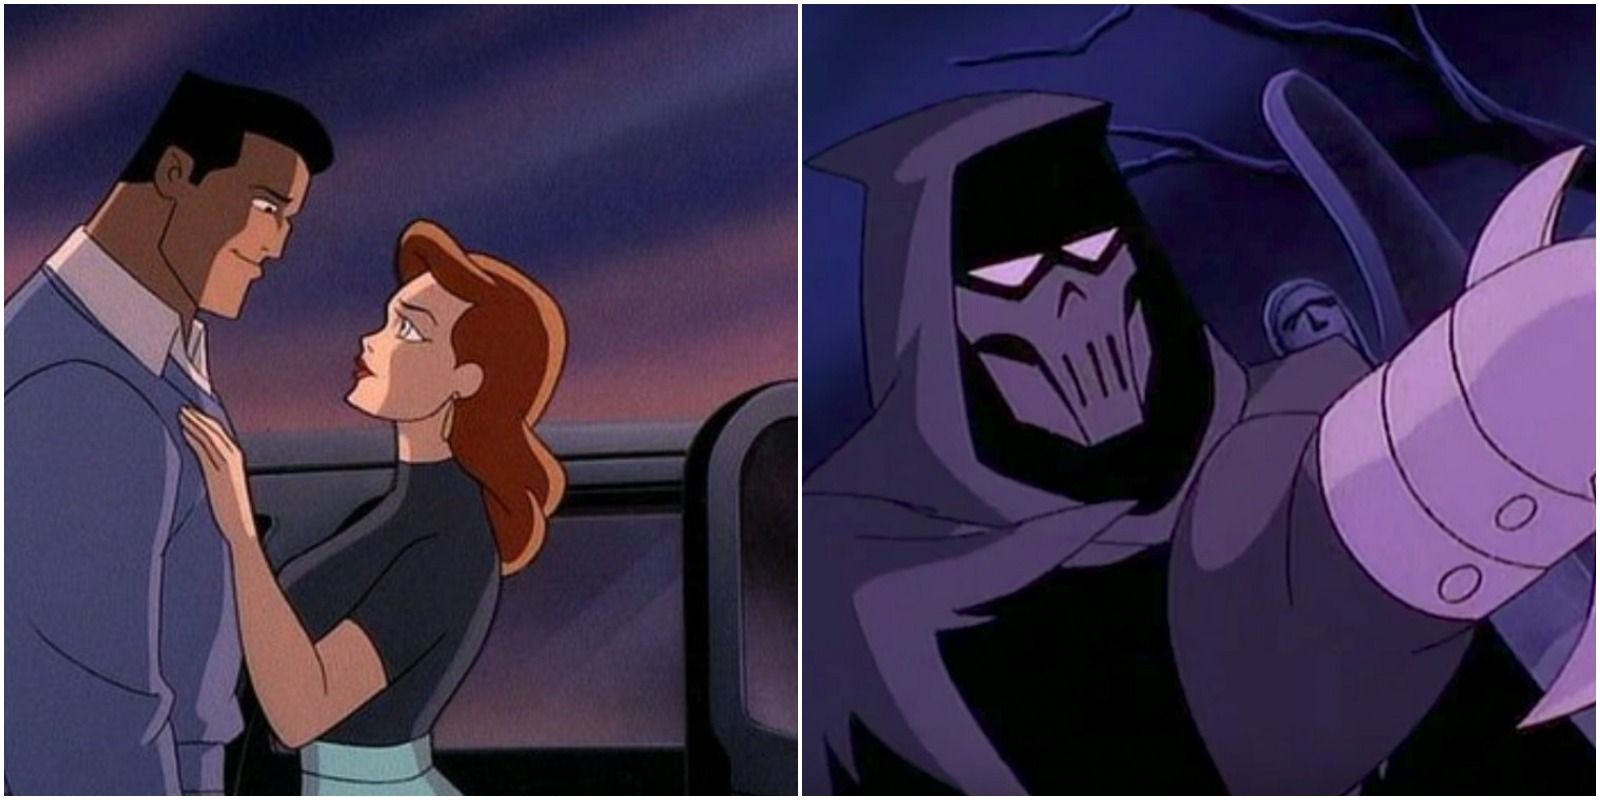 Andrea Beaumont/Phantasm in the Mask of the Phantasm animated movie